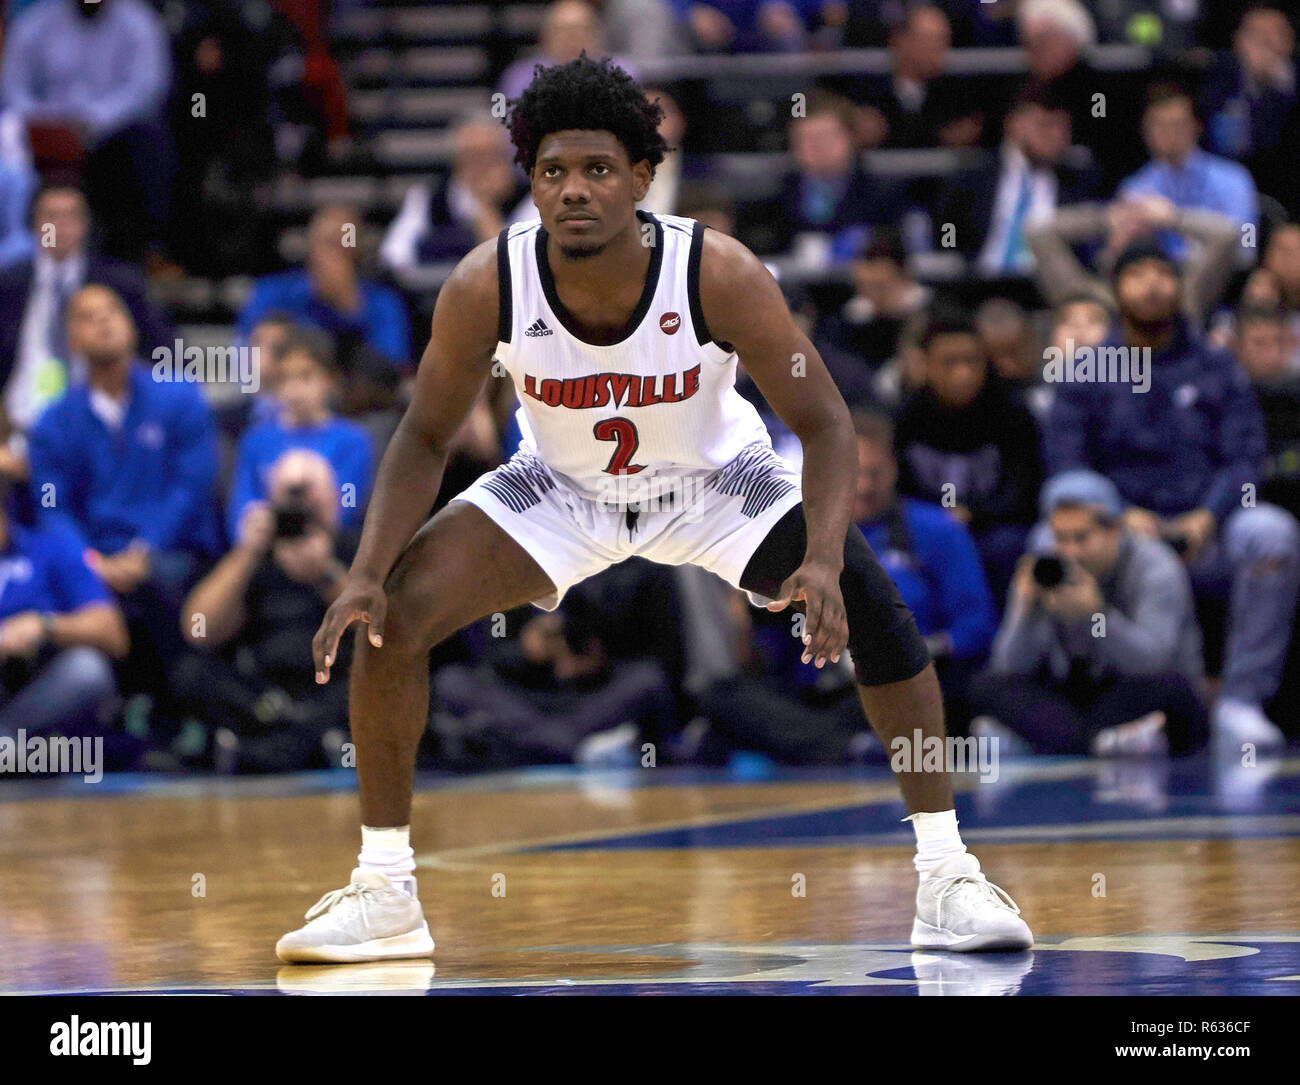 Newark, New Jersey, USA. 3rd Dec, 2018. Louisville Cardinals guard Darius Perry (2) on the defense in the second half during NCAA Men's action between the Seton Hall Pirates and the Louisville Cardinals at the Prudential Center in Newark, New Jersey. Louisville defeated Seton Hall 70-65. Duncan Williams/CSM/Alamy Live News Stock Photo